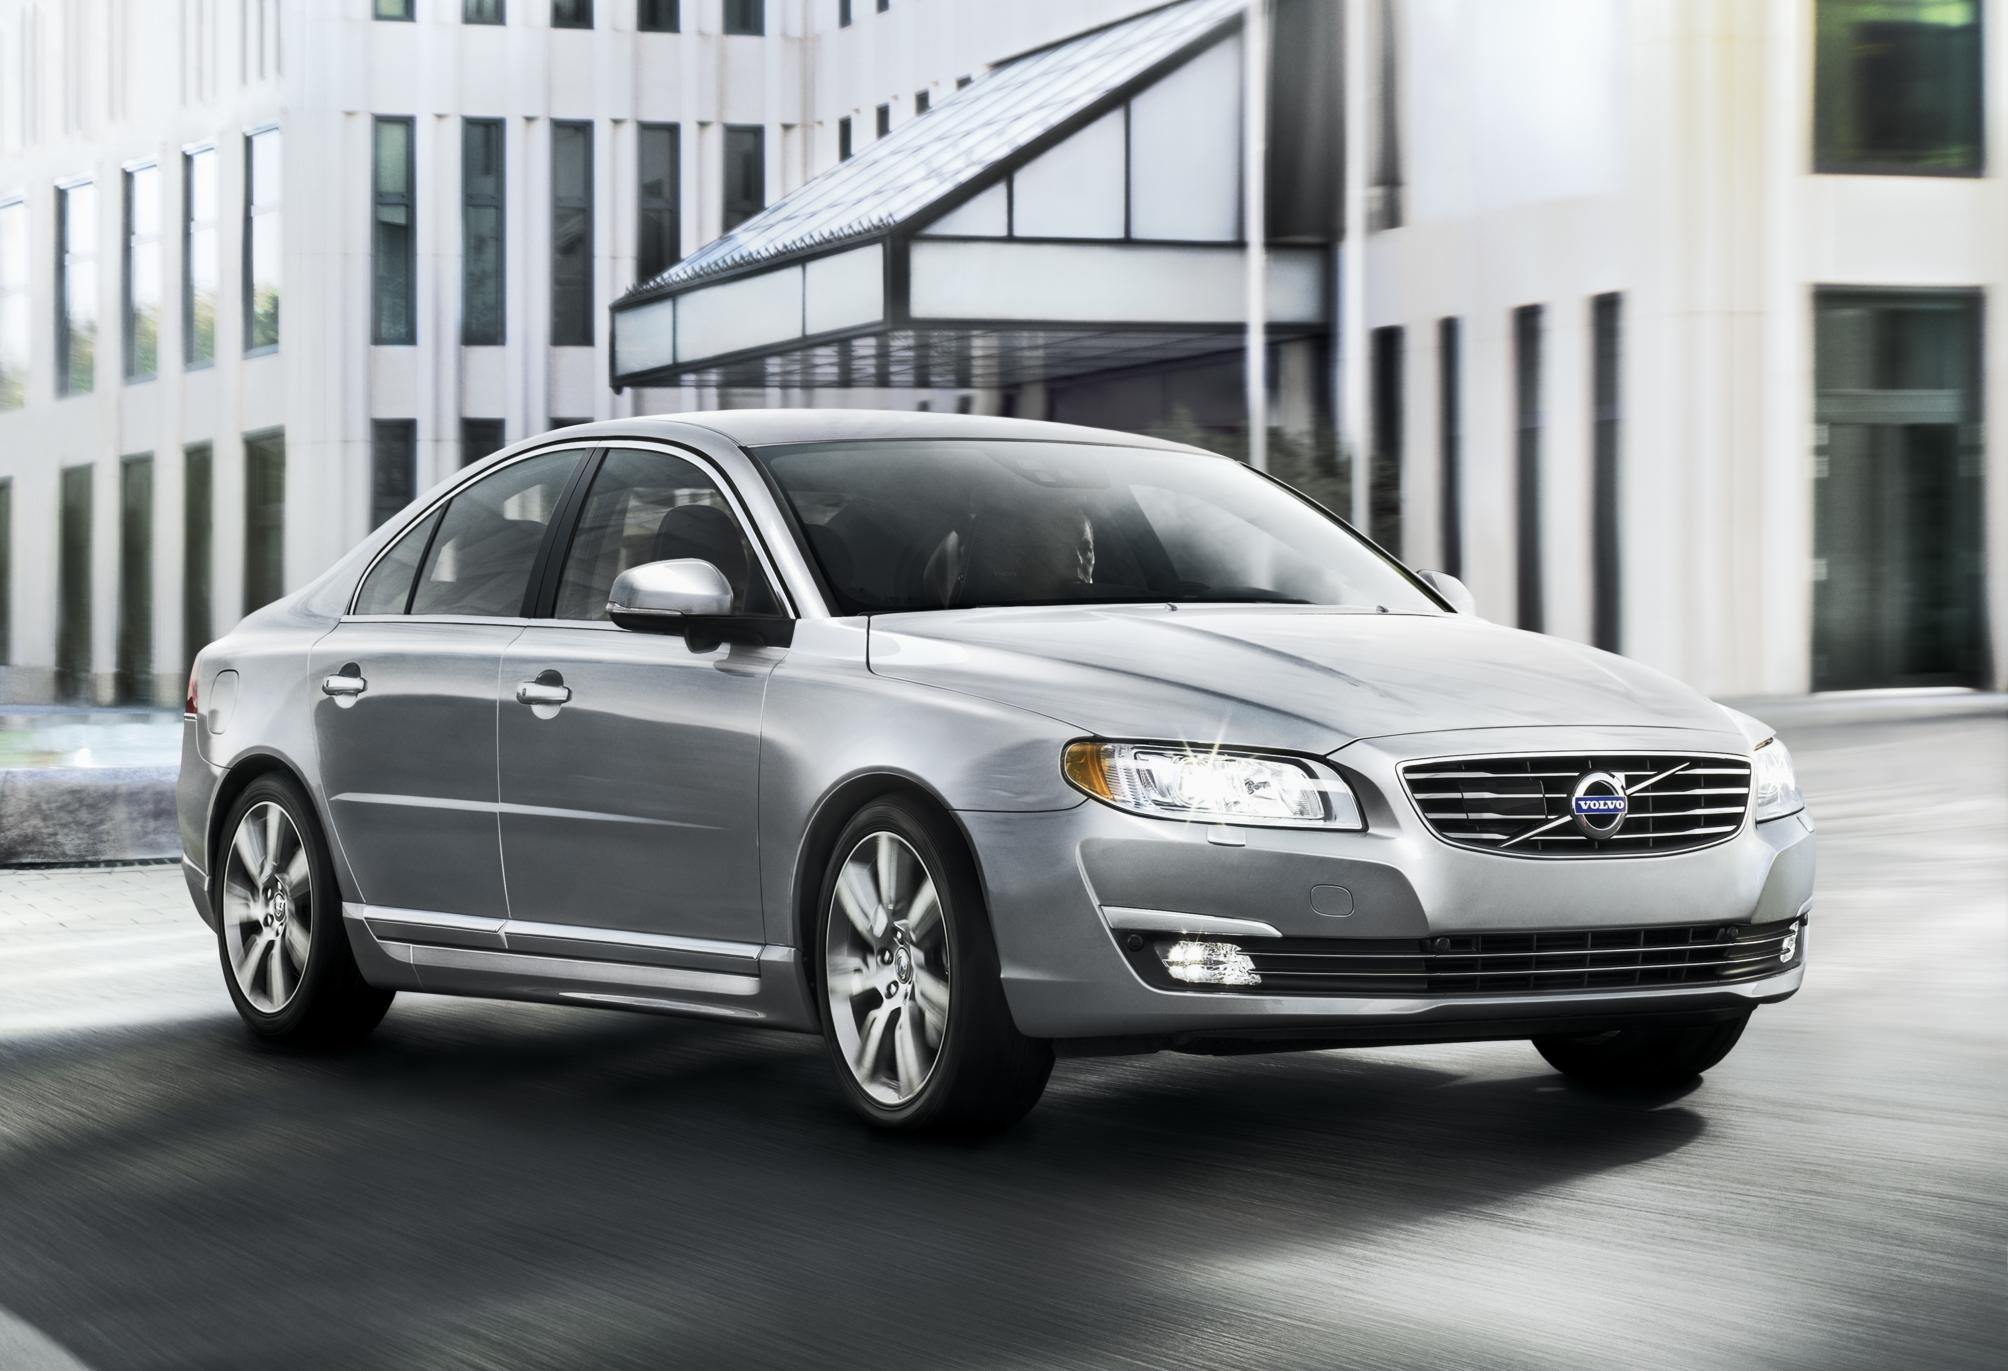 New 2014 Volvo S80 To Be Introduced On March 19 In India India Car News